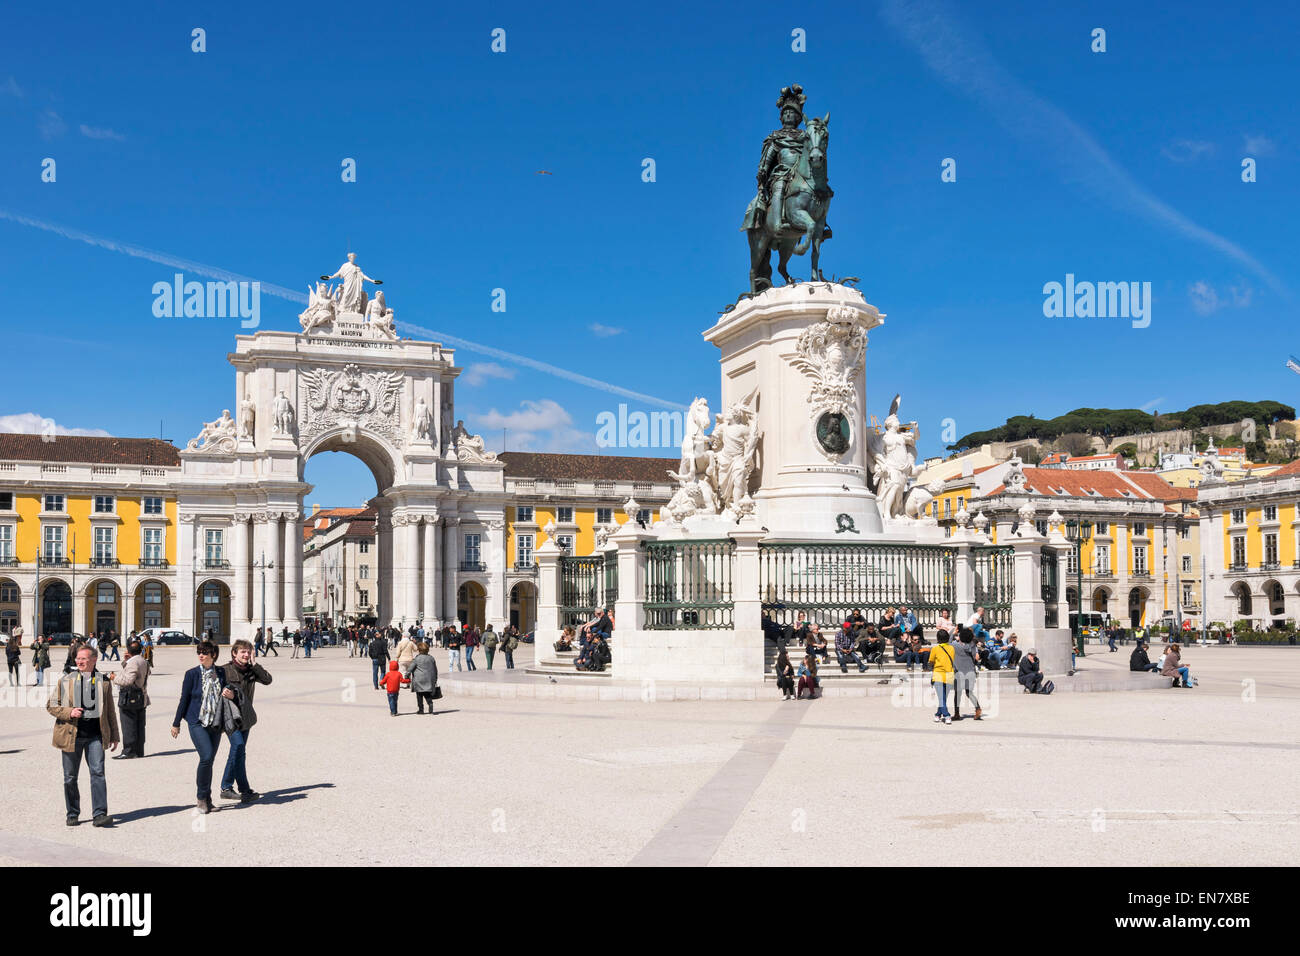 LISBON PORTUGALTHE PRACA DO COMERCIO SQUARE WITH ARCHWAY ARCO DA RUA AUGUSTA  AND STATUE OF KING JOSE 1 CRUSHING SNAKES  Stock Photo